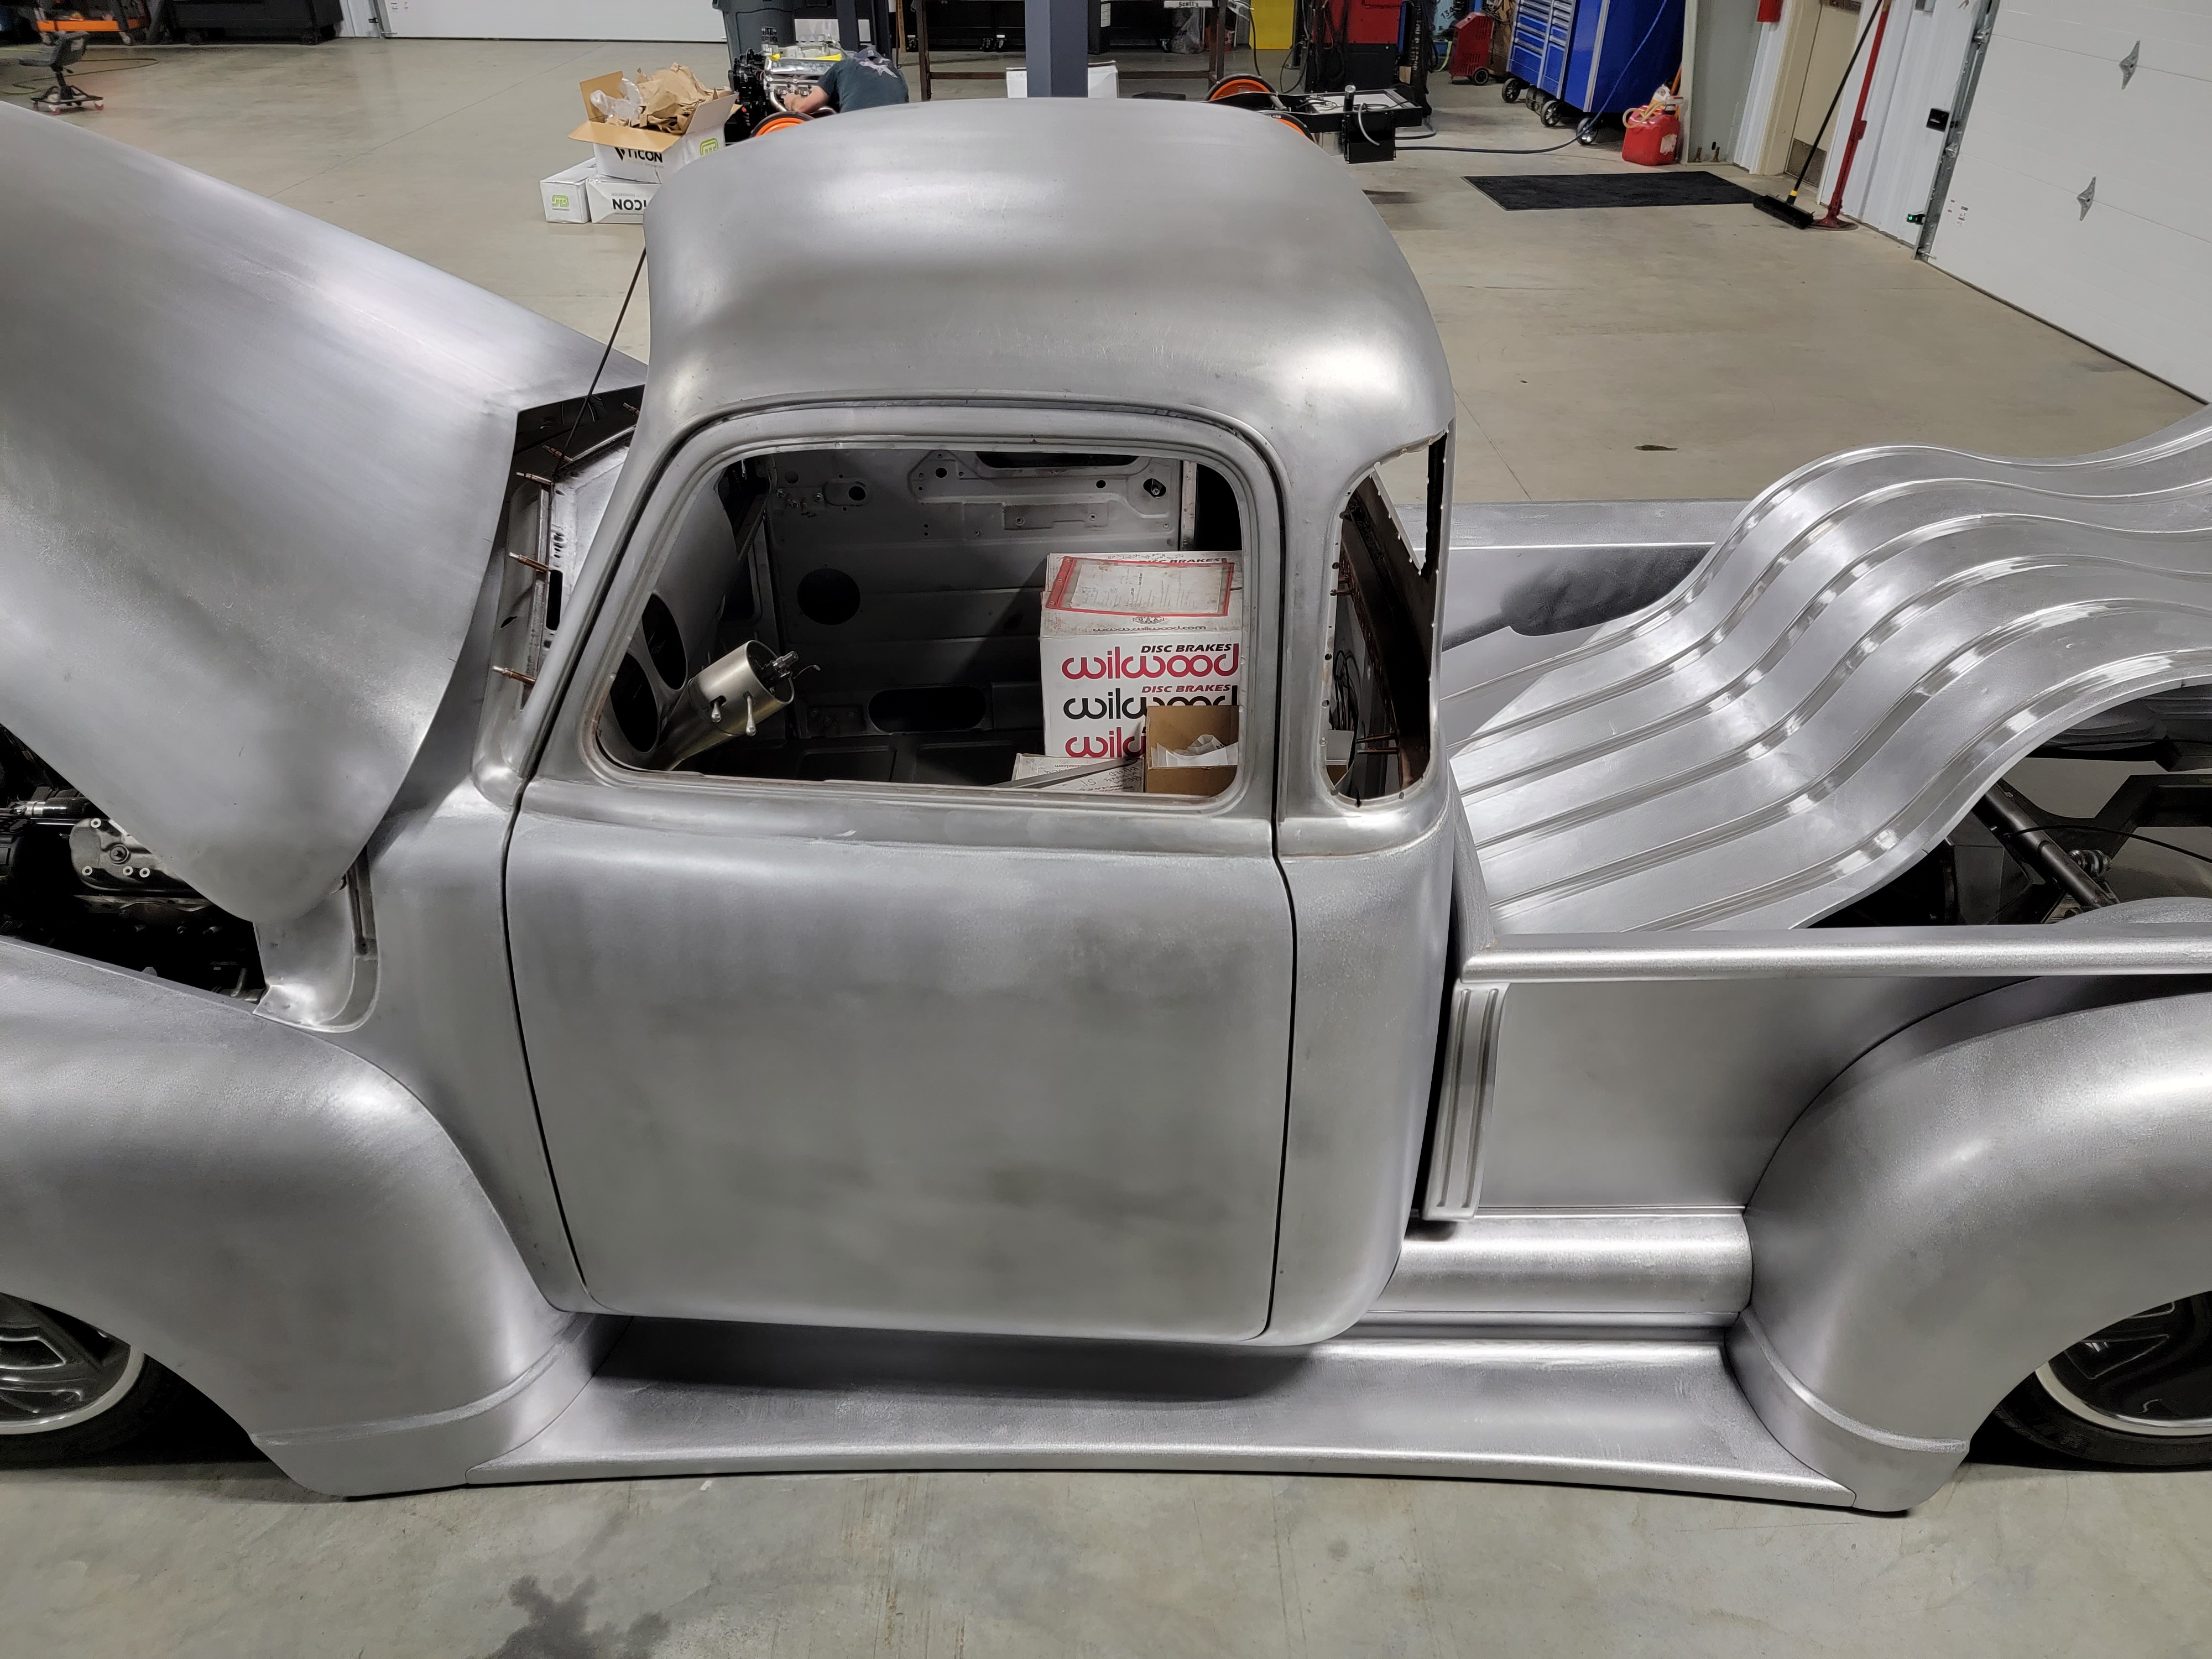 scotts-hotrods-51-chevy-project-truck-2603